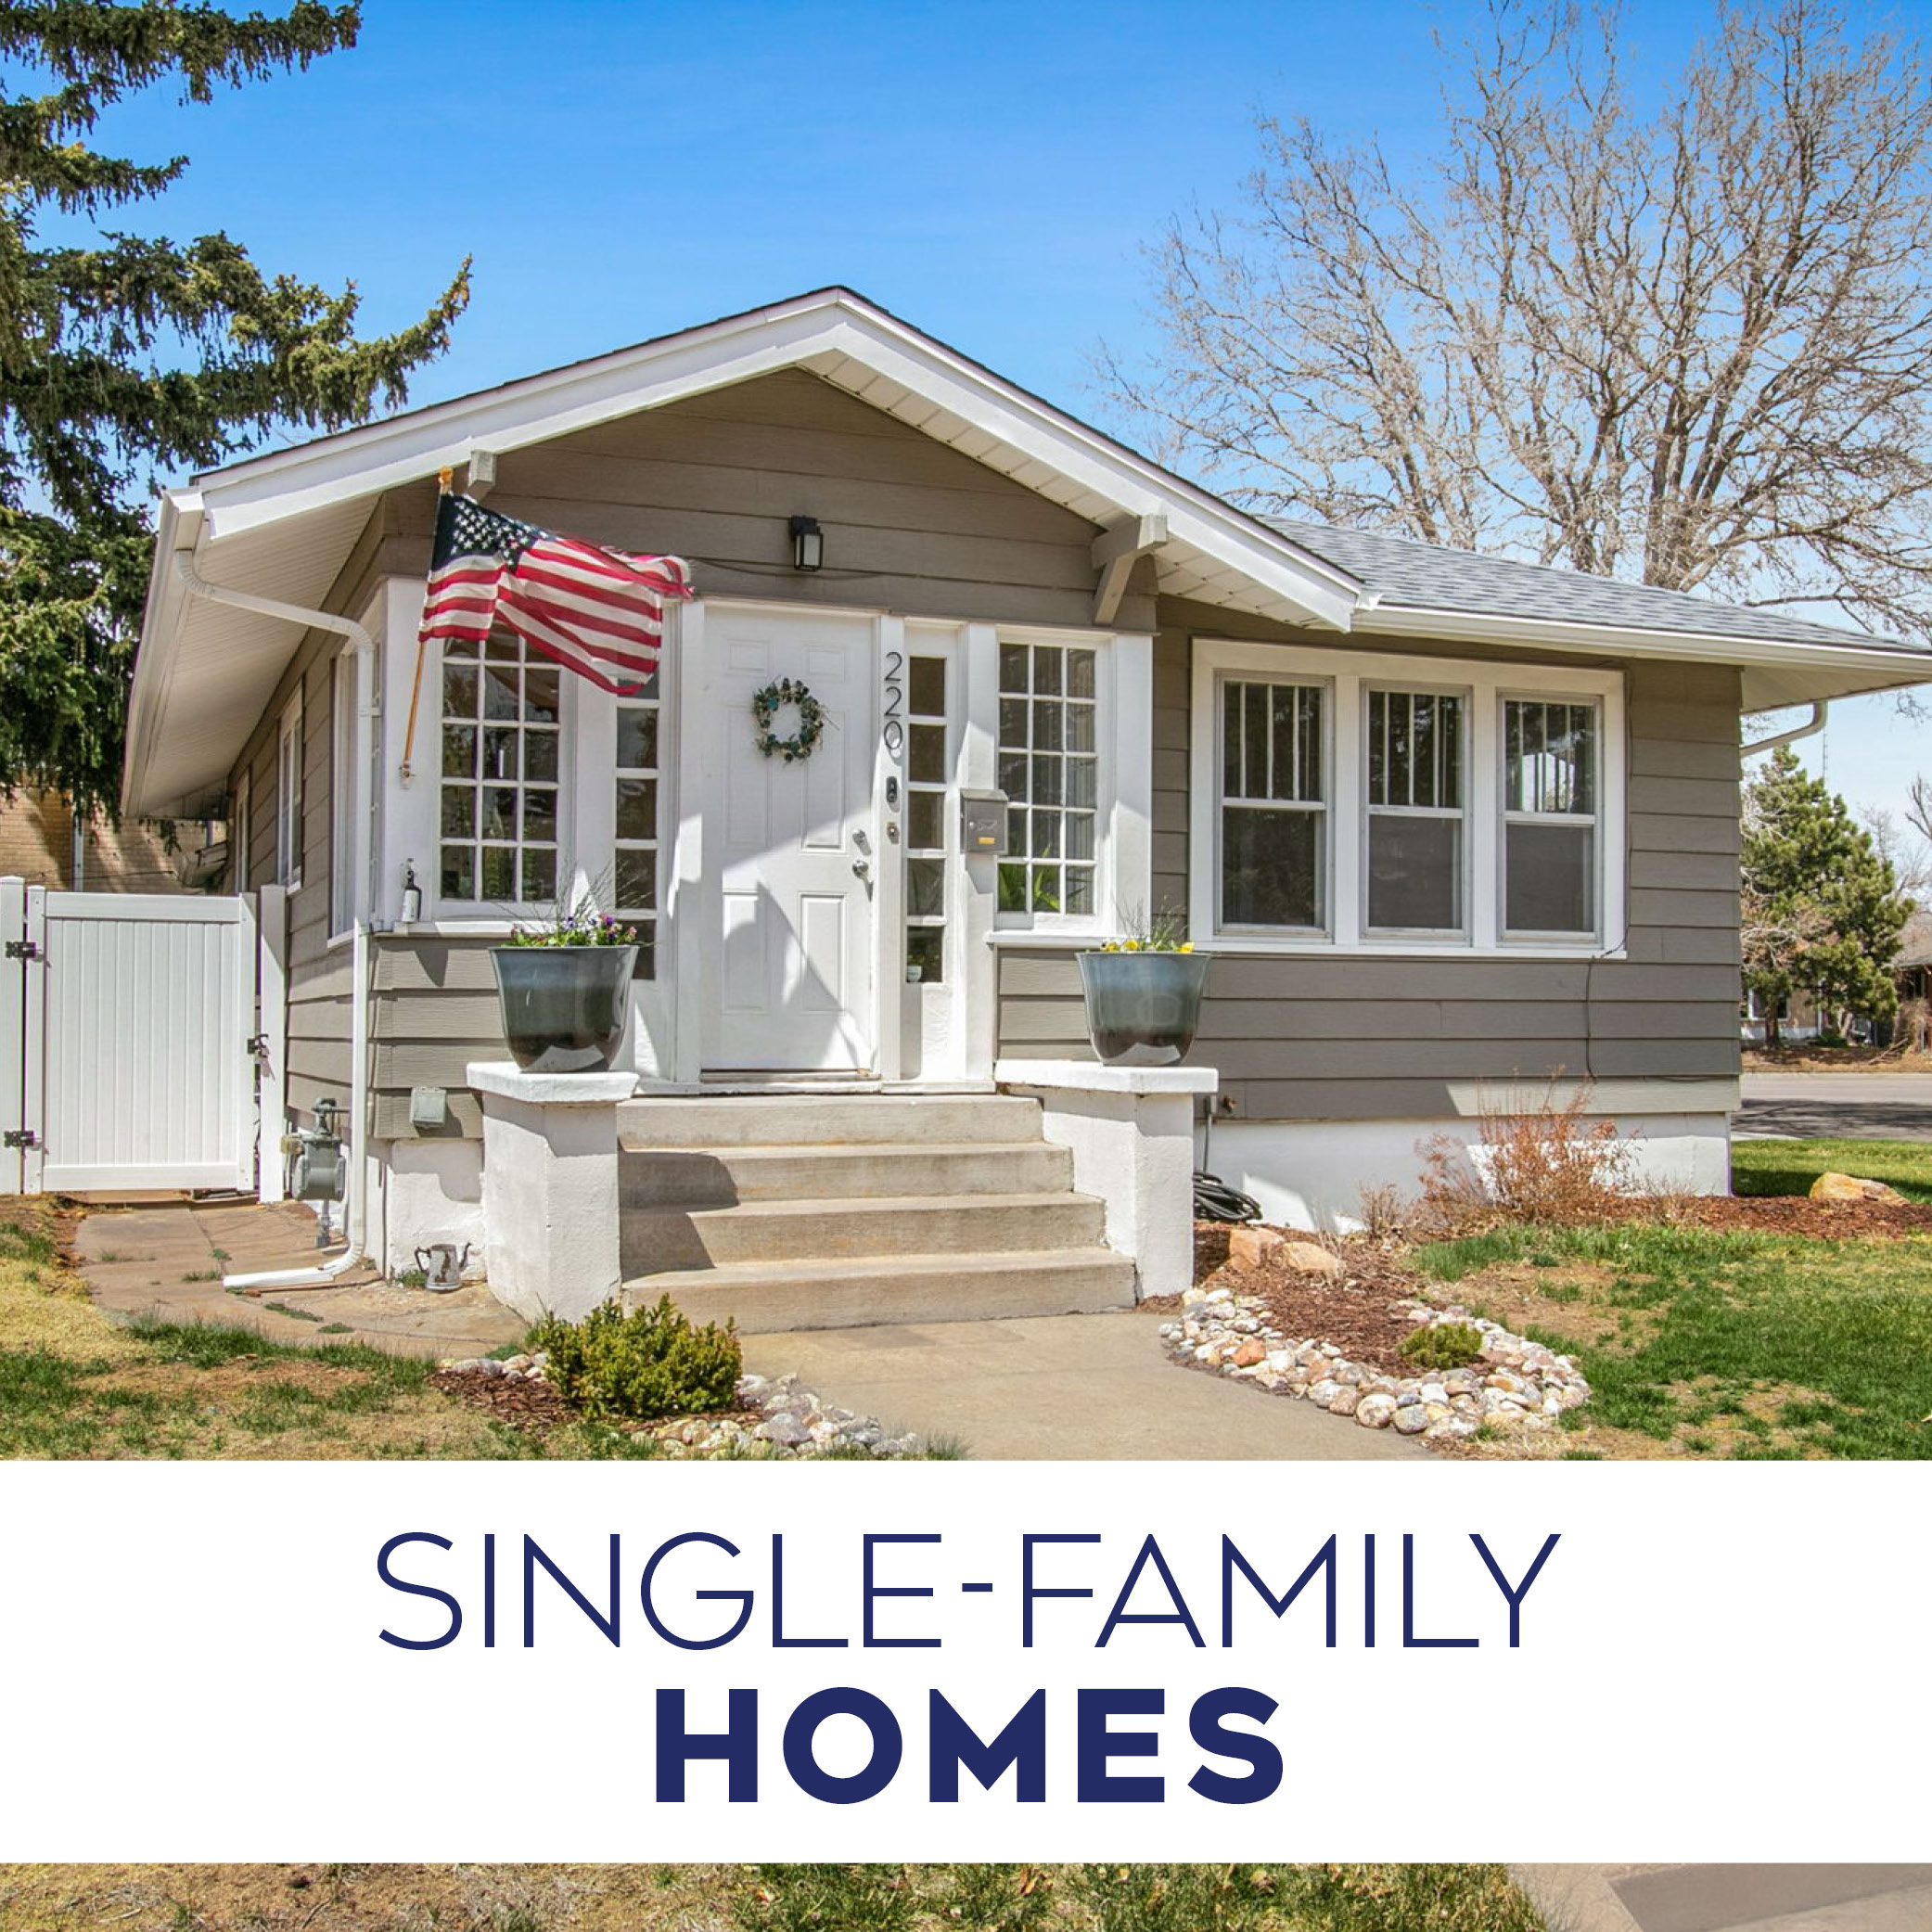 Single-Family Homes Coldwell Banker Real Estate Cheyenne Wyoming